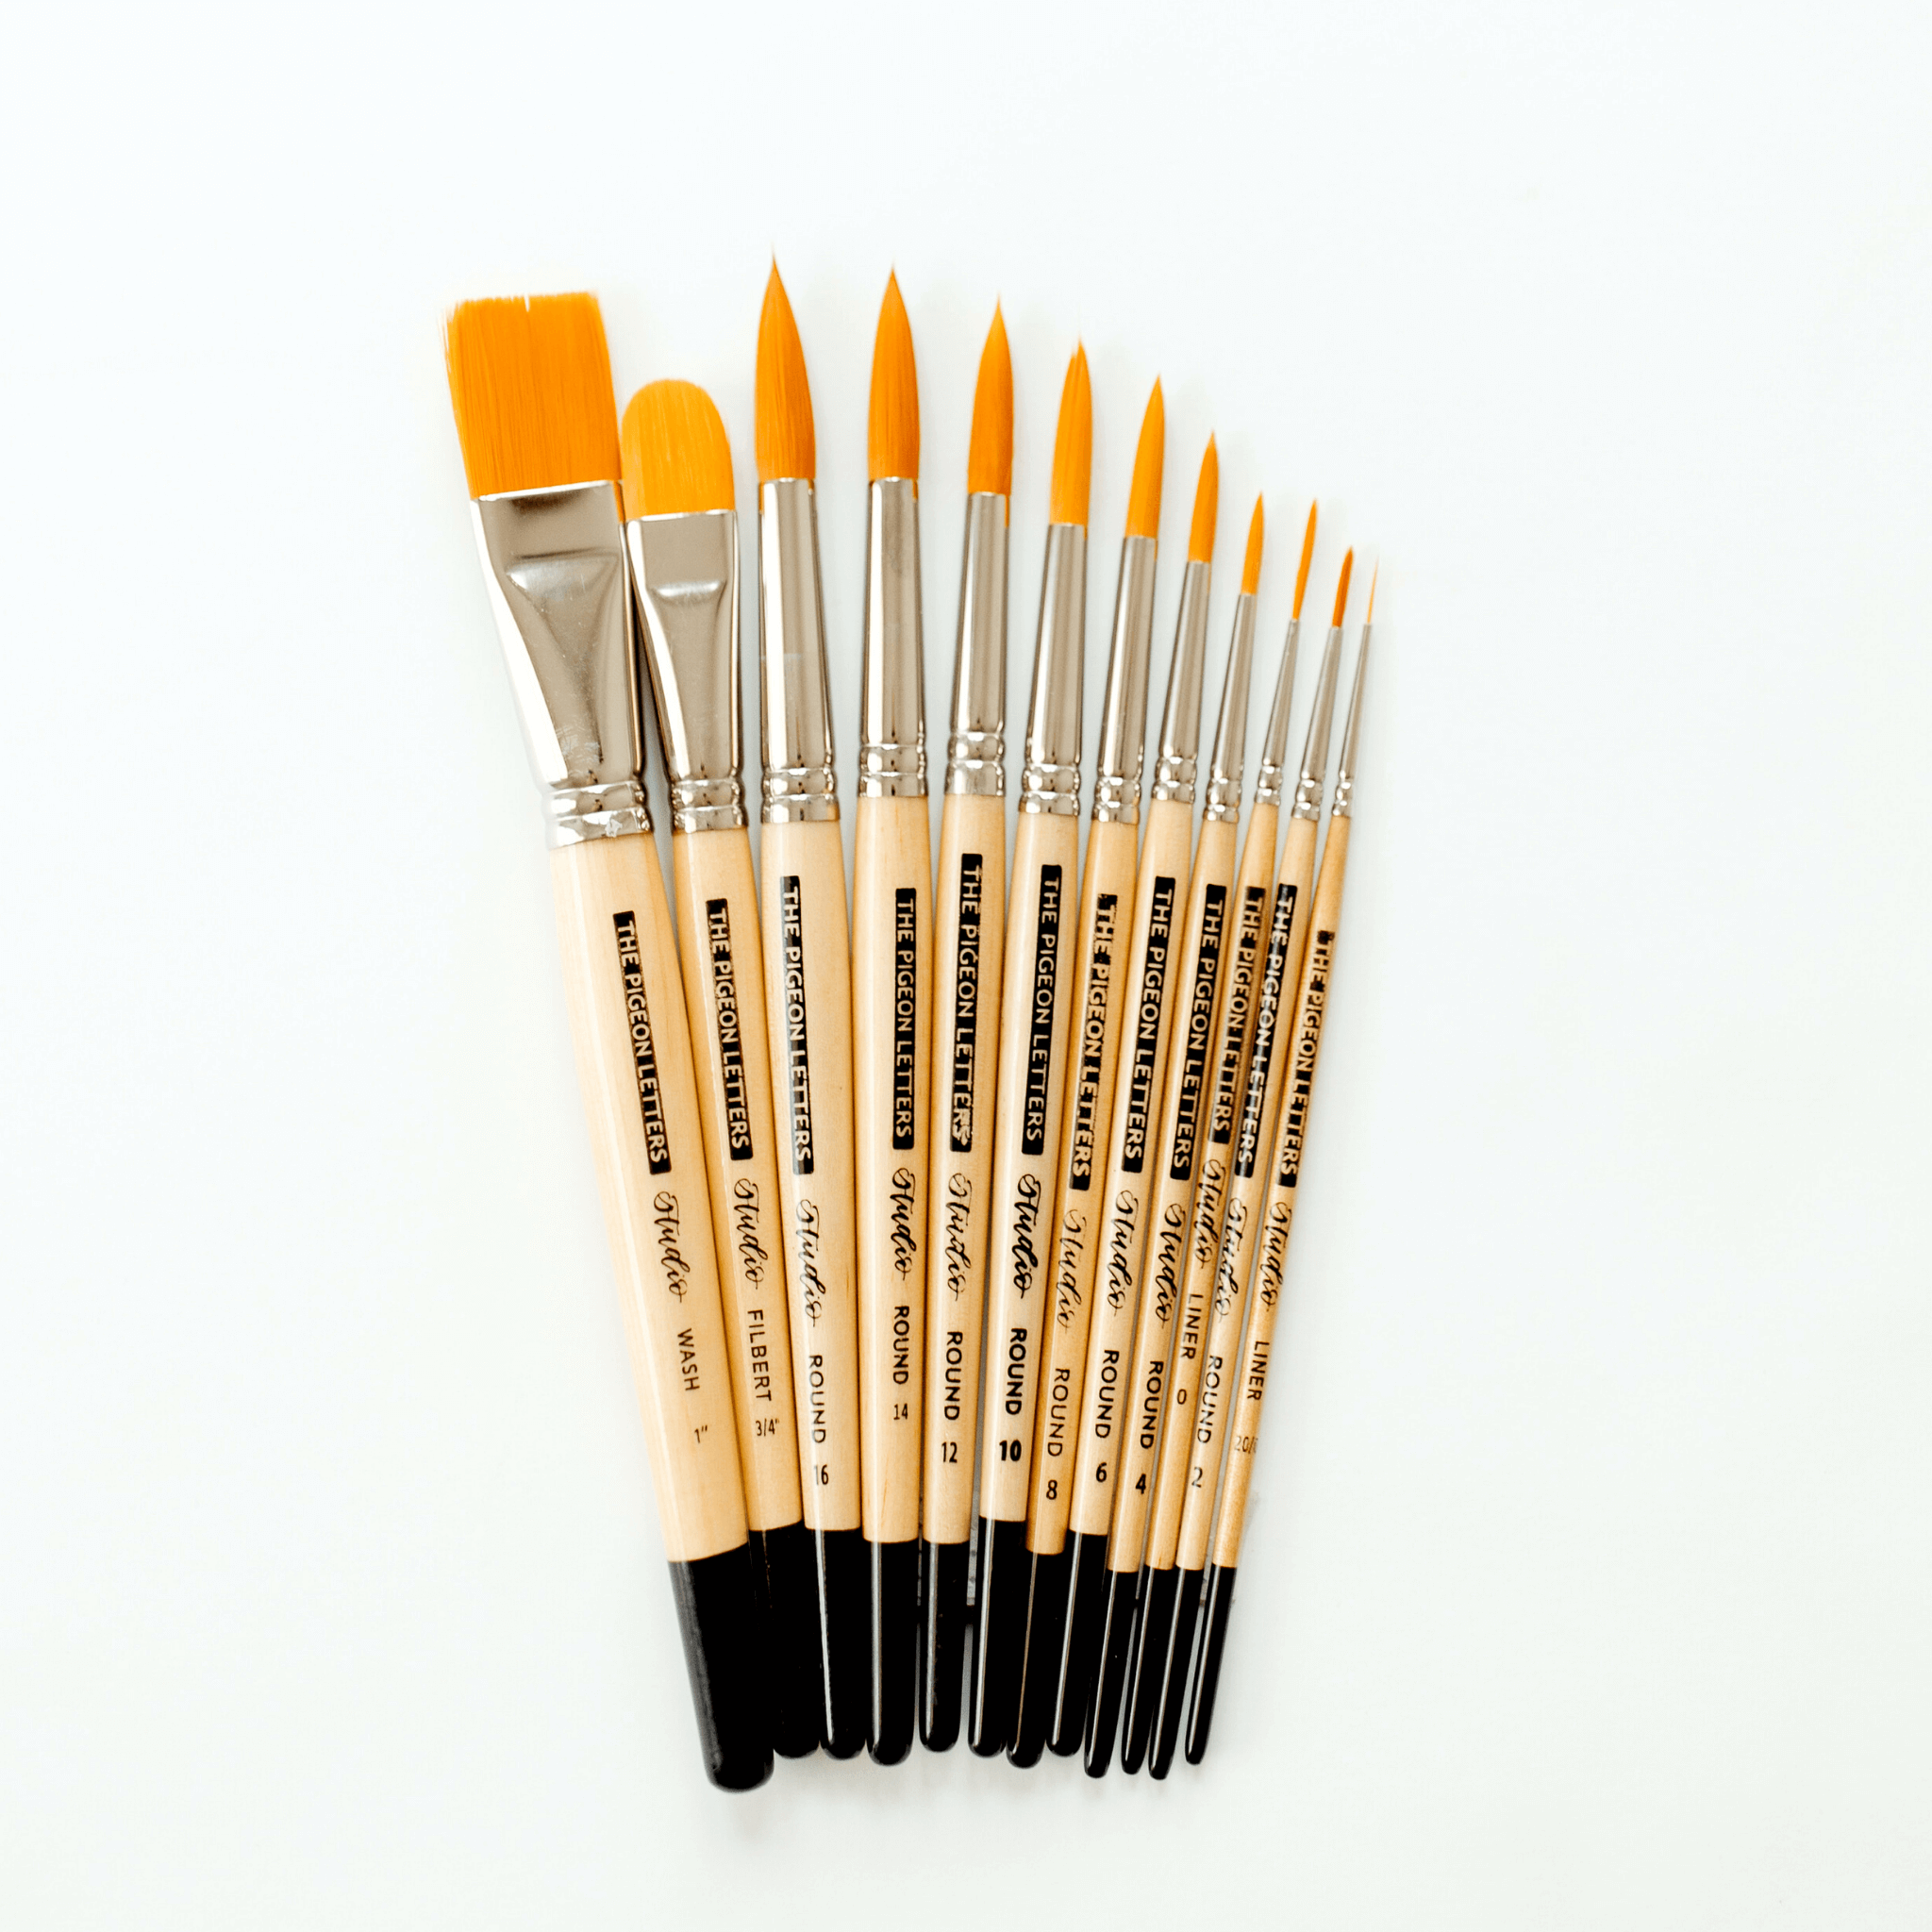 Hand Lettering Paint Brushes: Filbert vs Round Tip - SOUTHERN